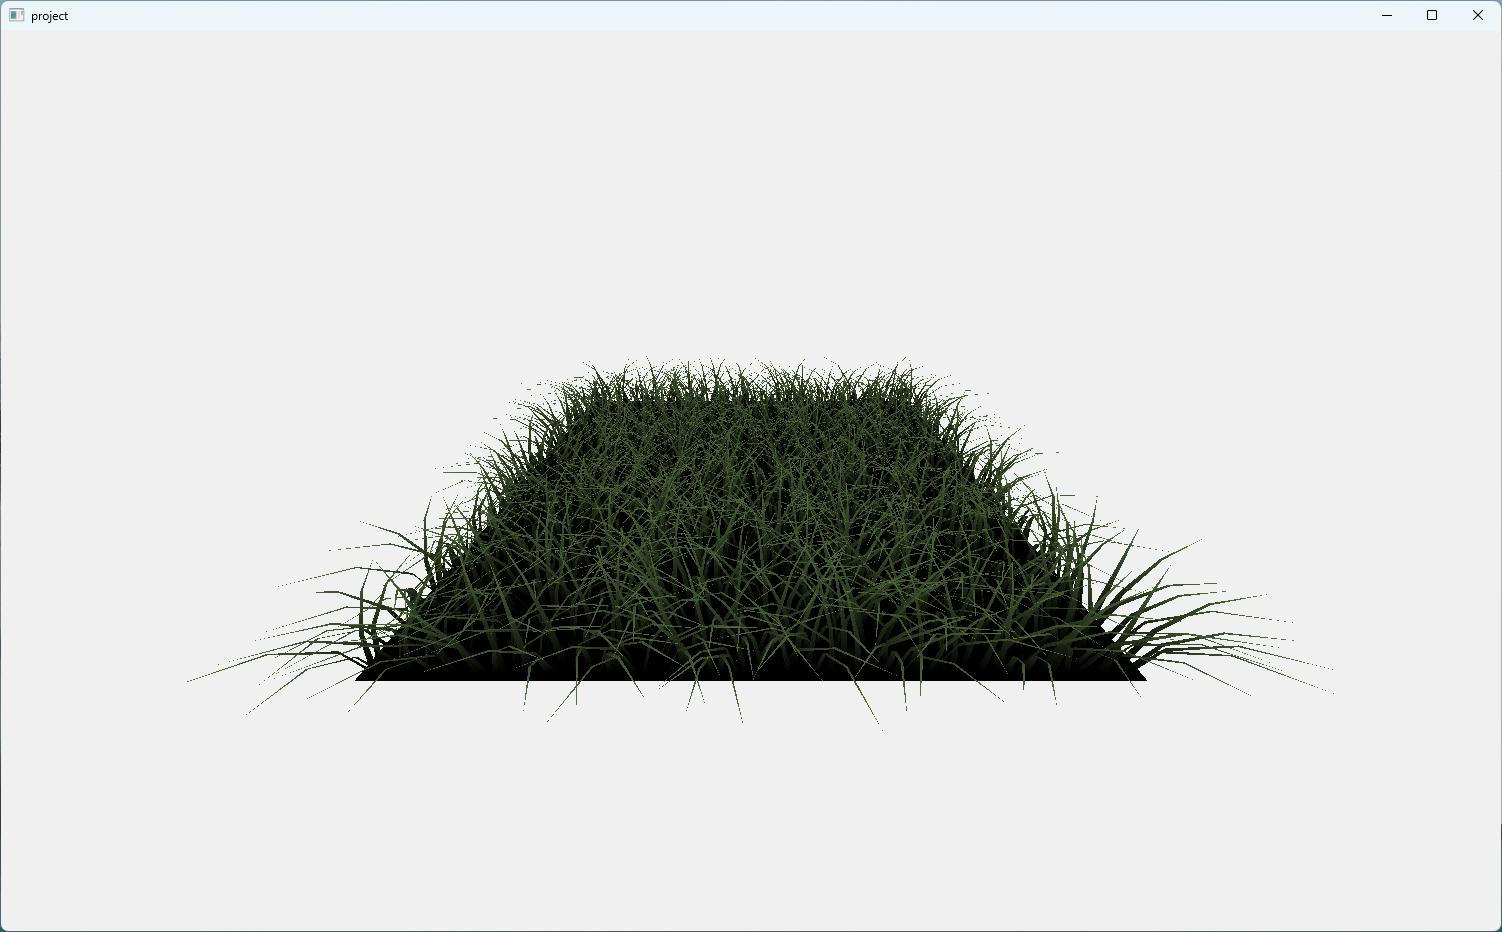 bended grass blade